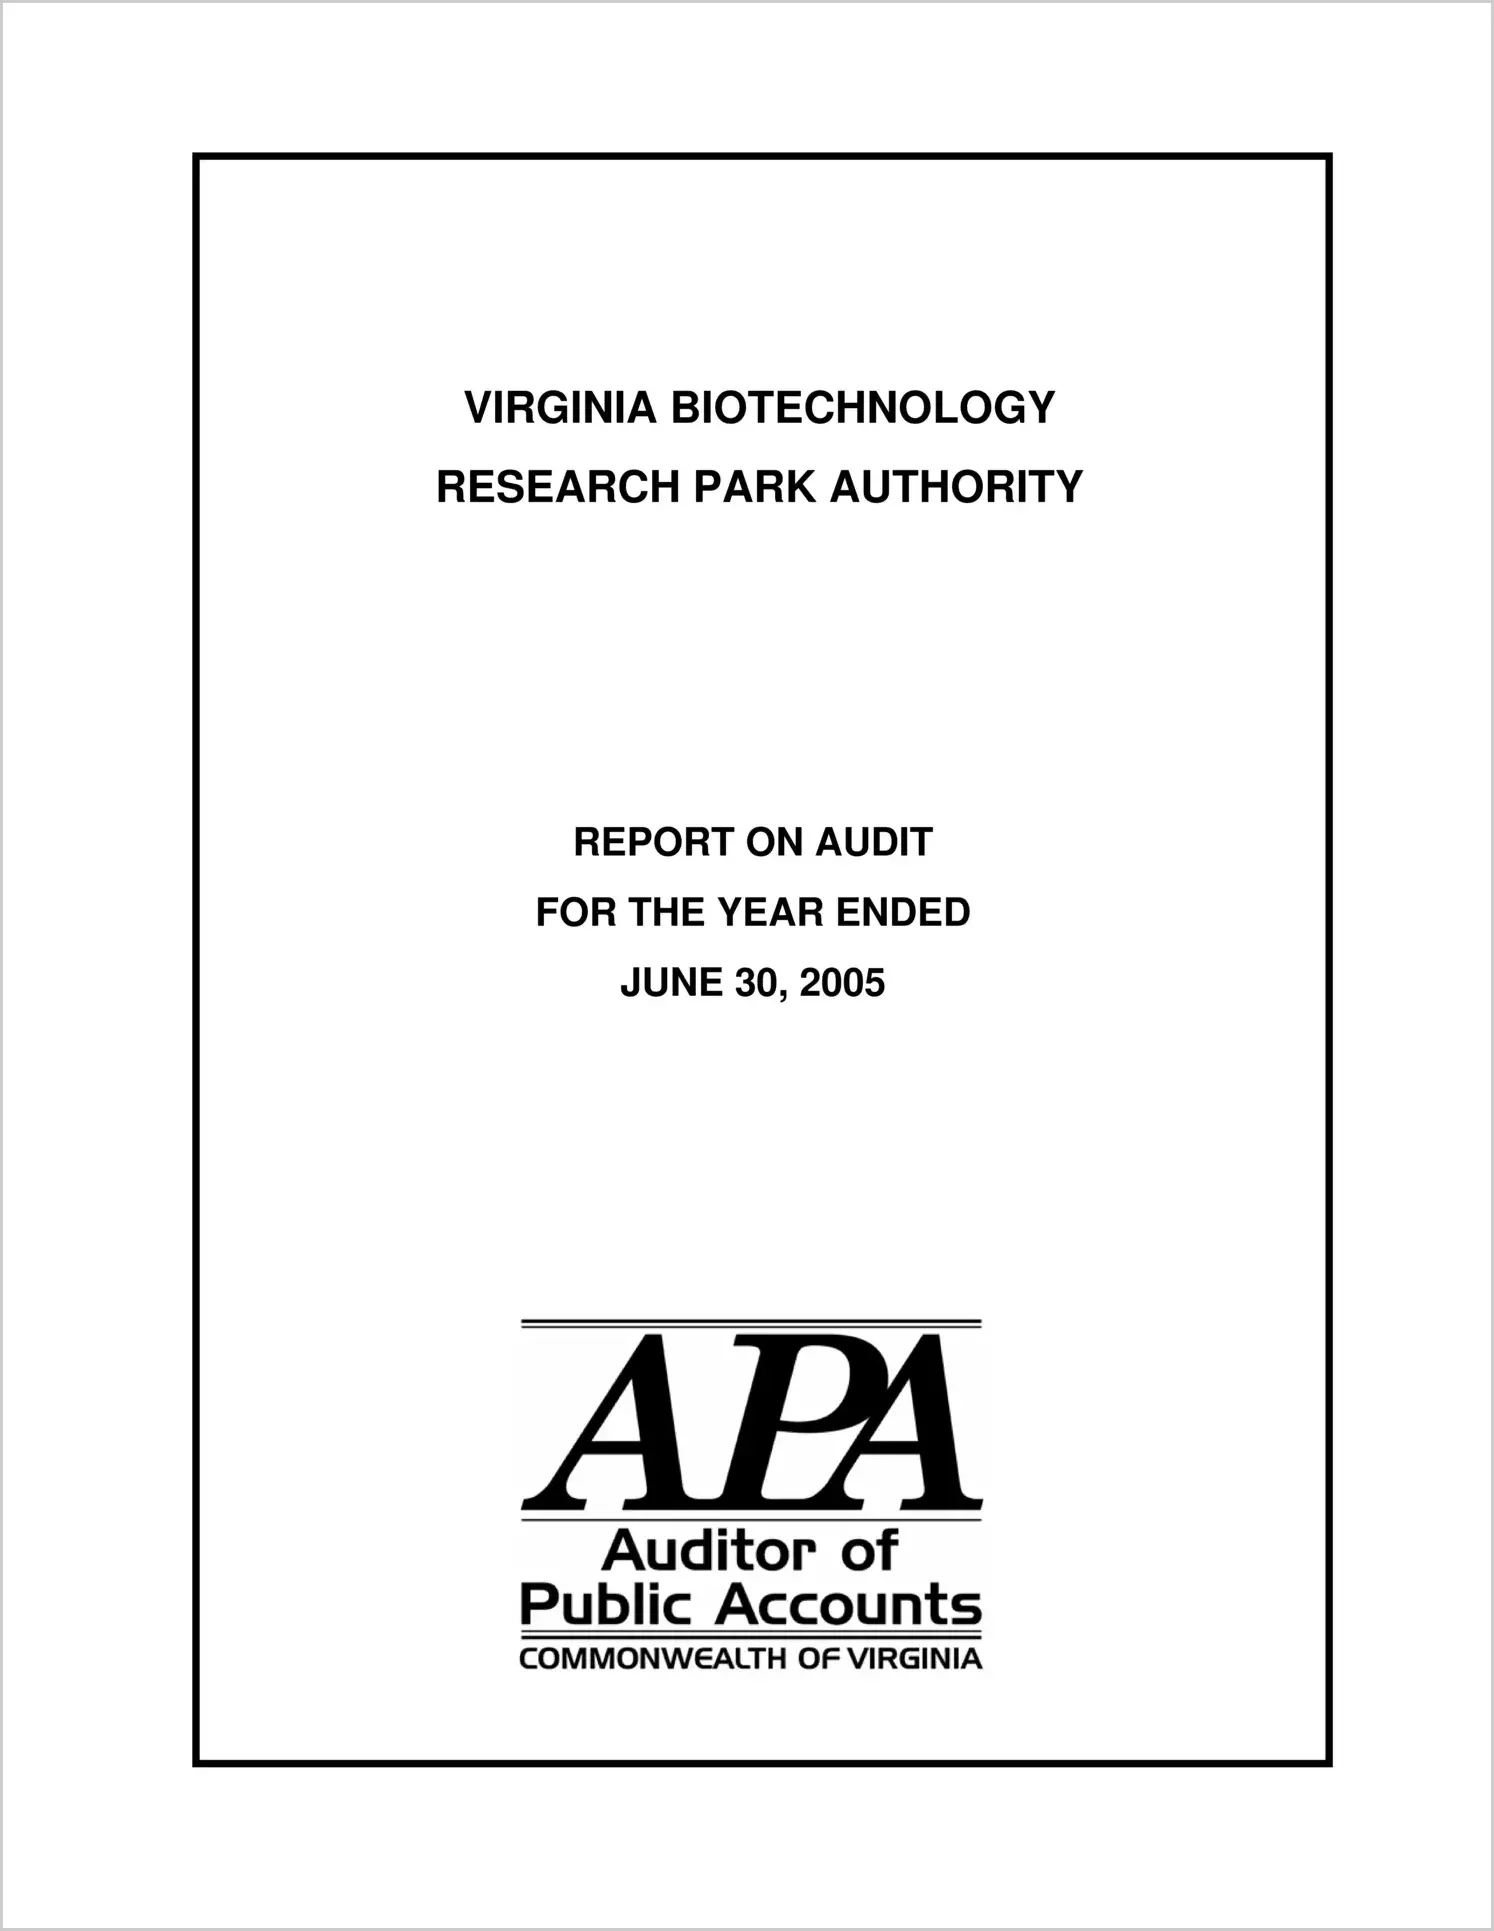 Virginia Biotechnology Research Park Authority for the year ended June 30, 2005